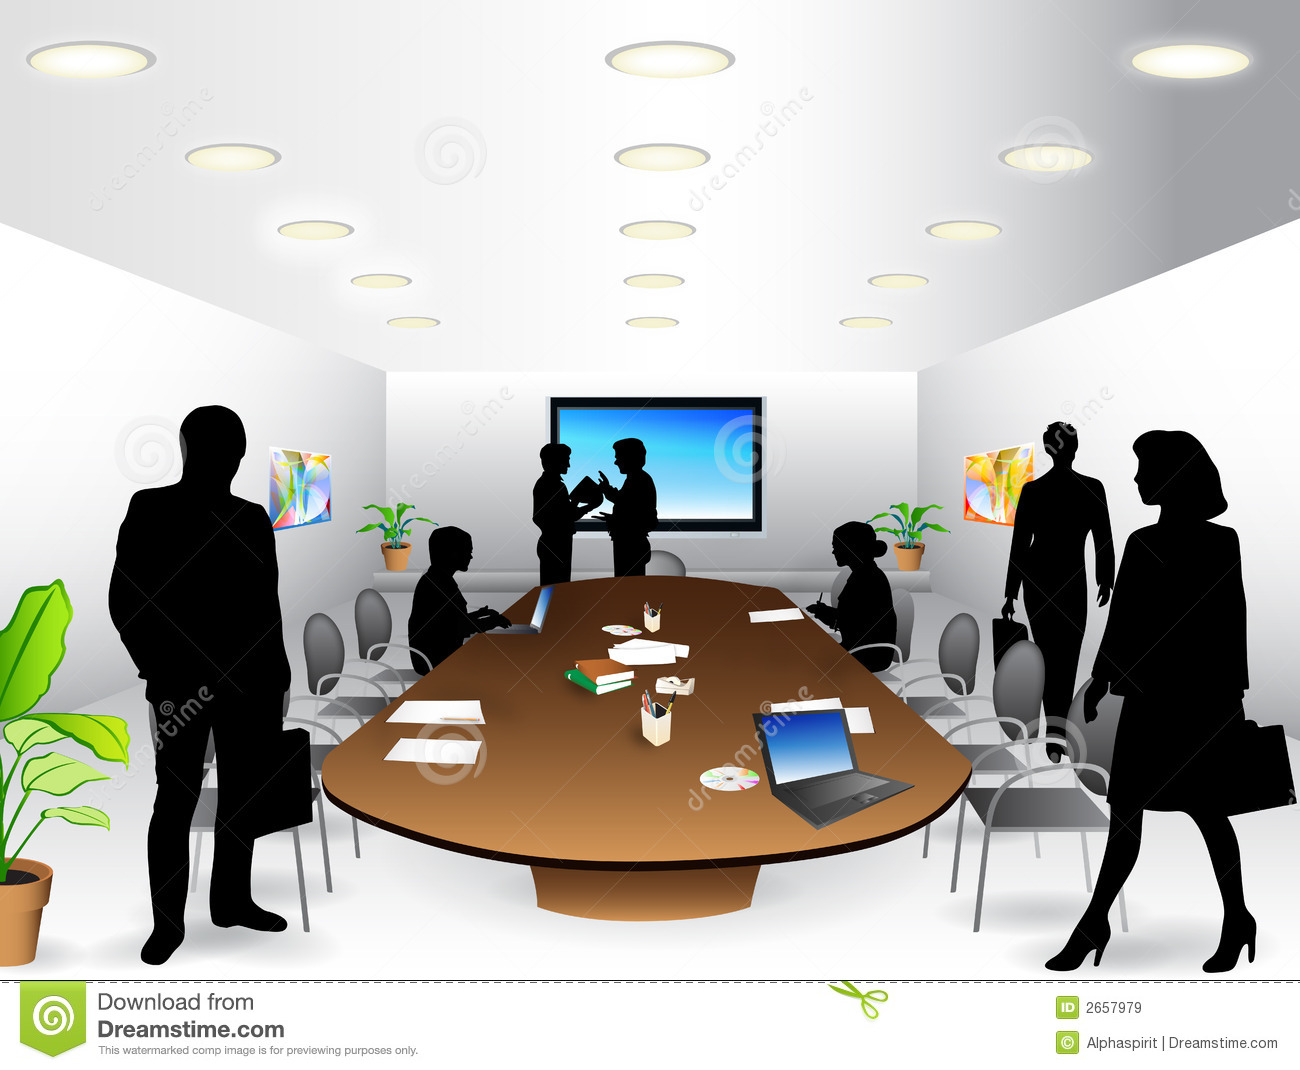 meeting-clipart-free-download-20-free-cliparts-download-images-on